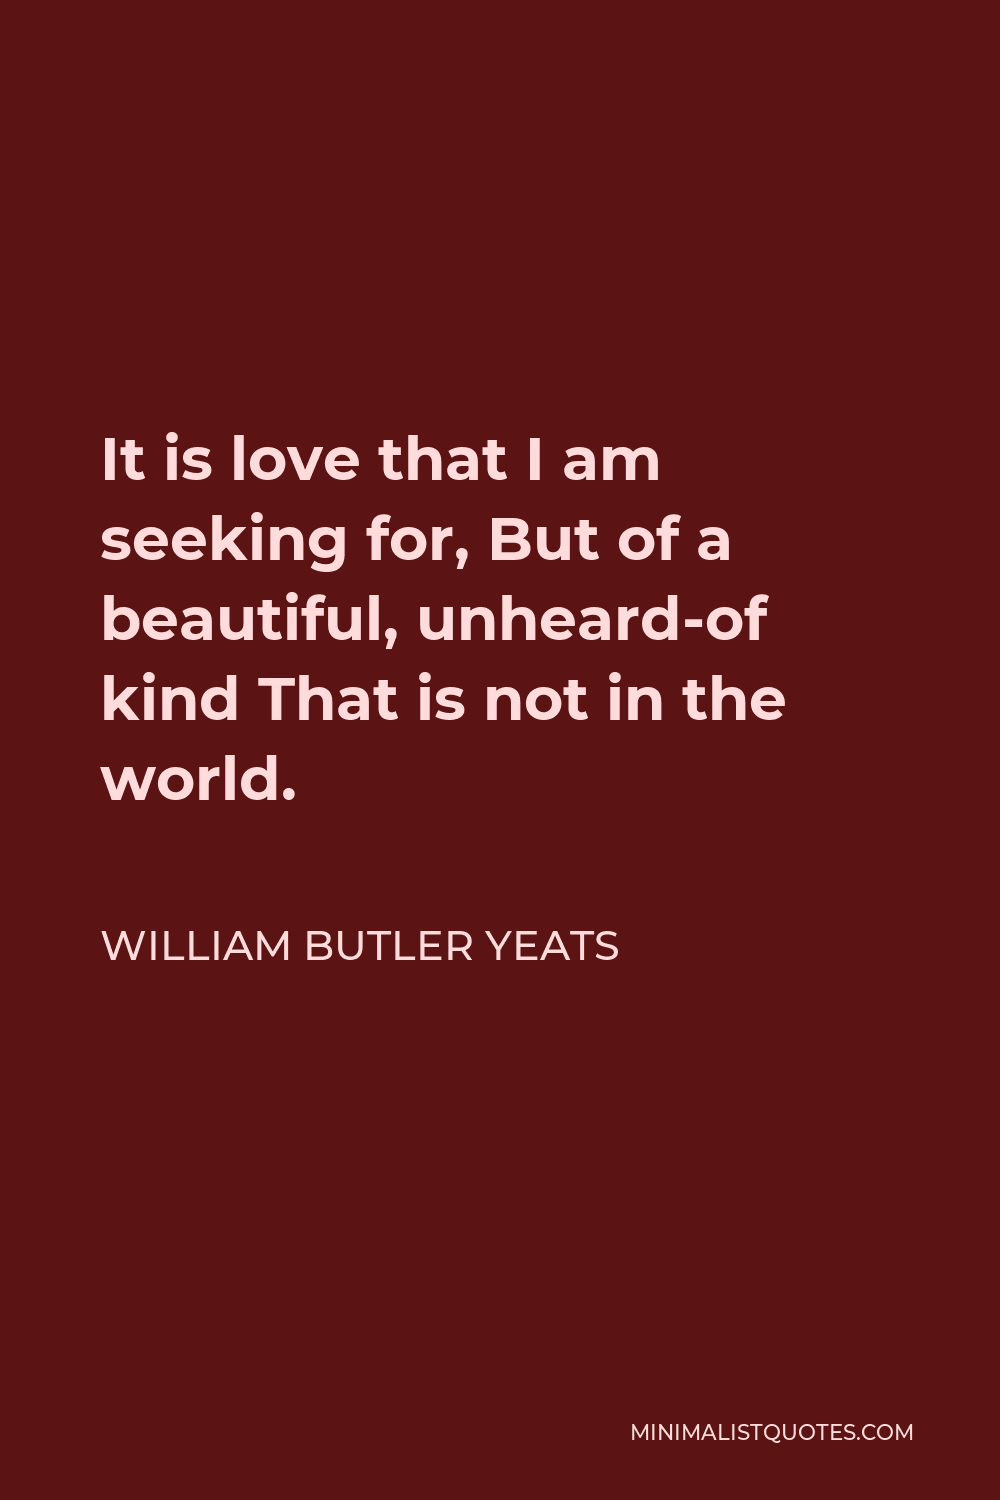 William Butler Yeats Quote - It is love that I am seeking for, But of a beautiful, unheard-of kind That is not in the world.